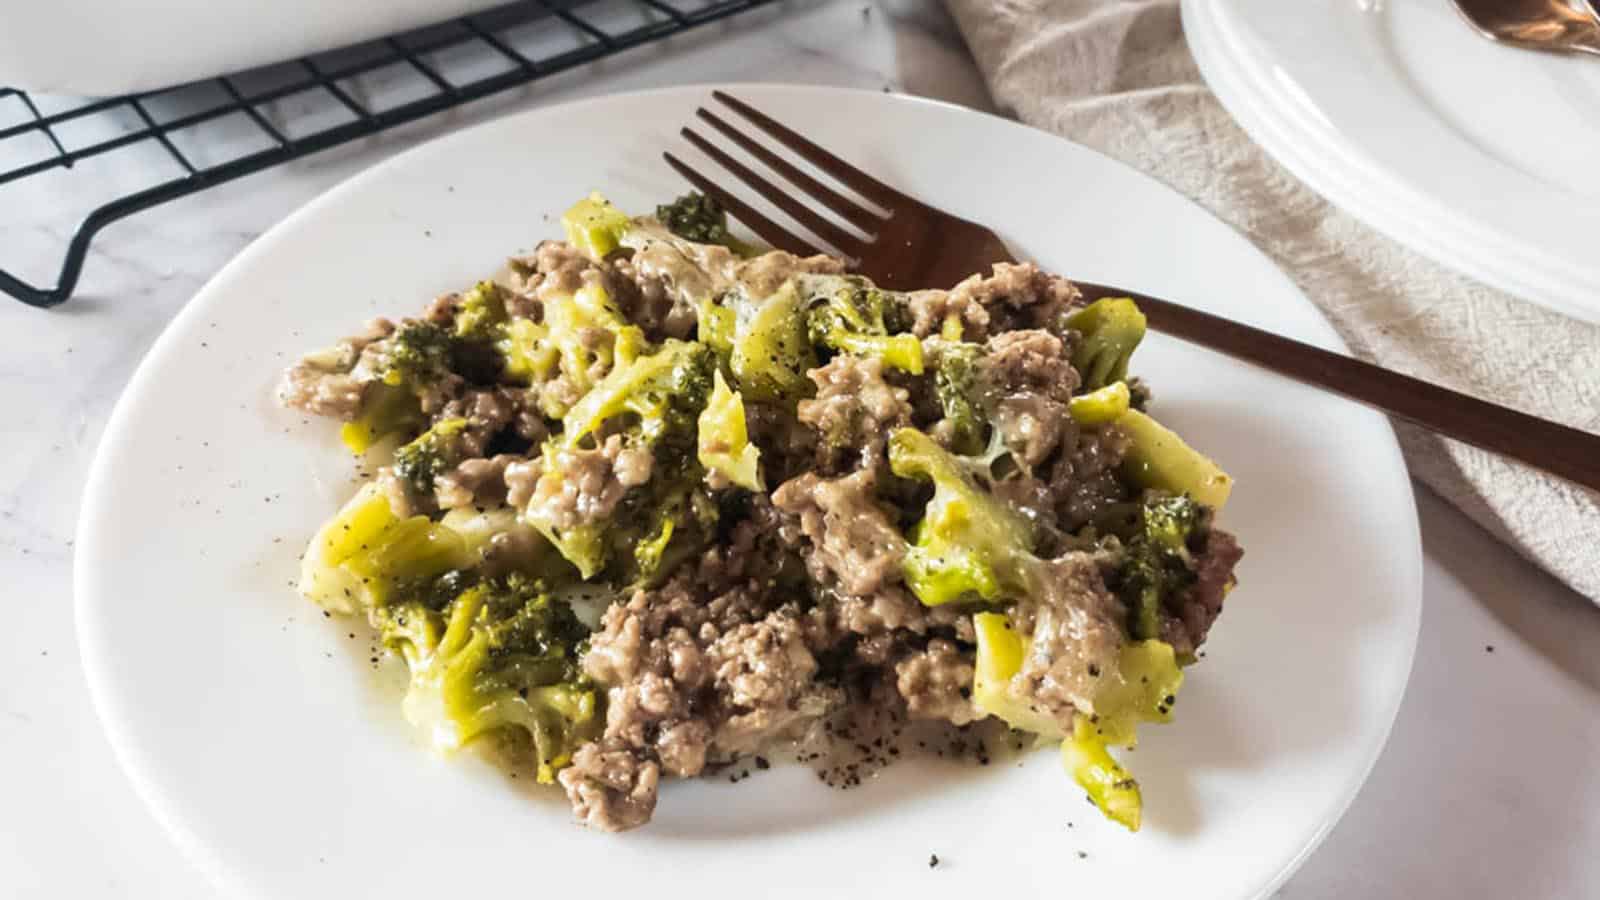 A plate of ground beef and broccoli casserole on white plate with a copper fork.